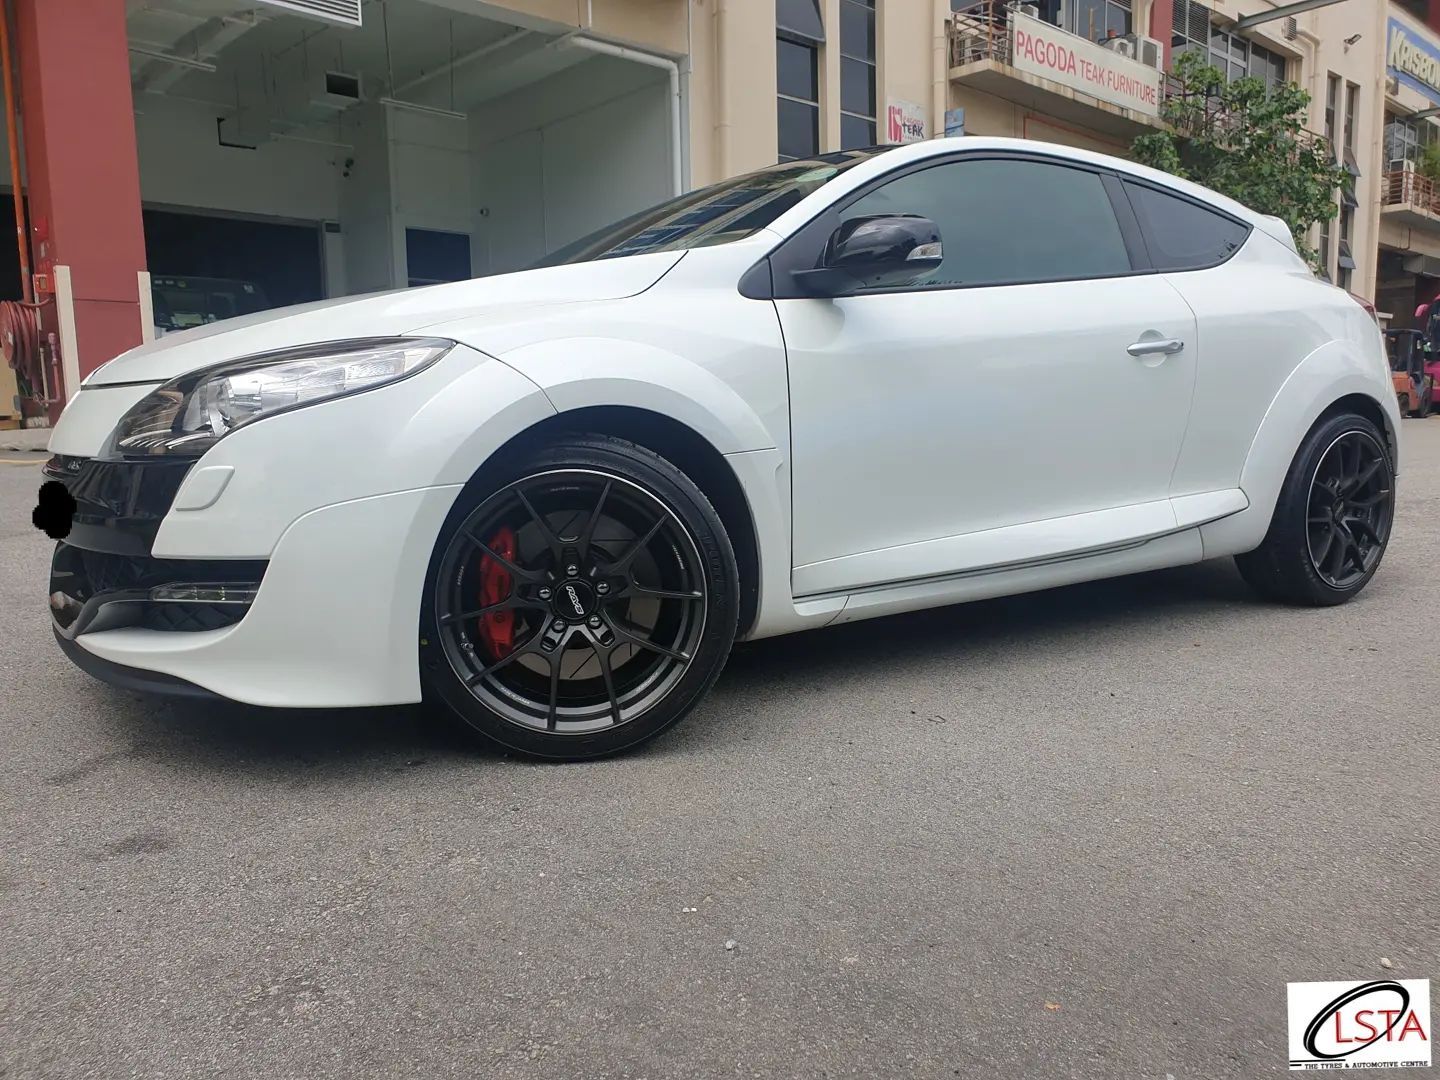 Renault Megane RS with 18-inch Rays Volk G025